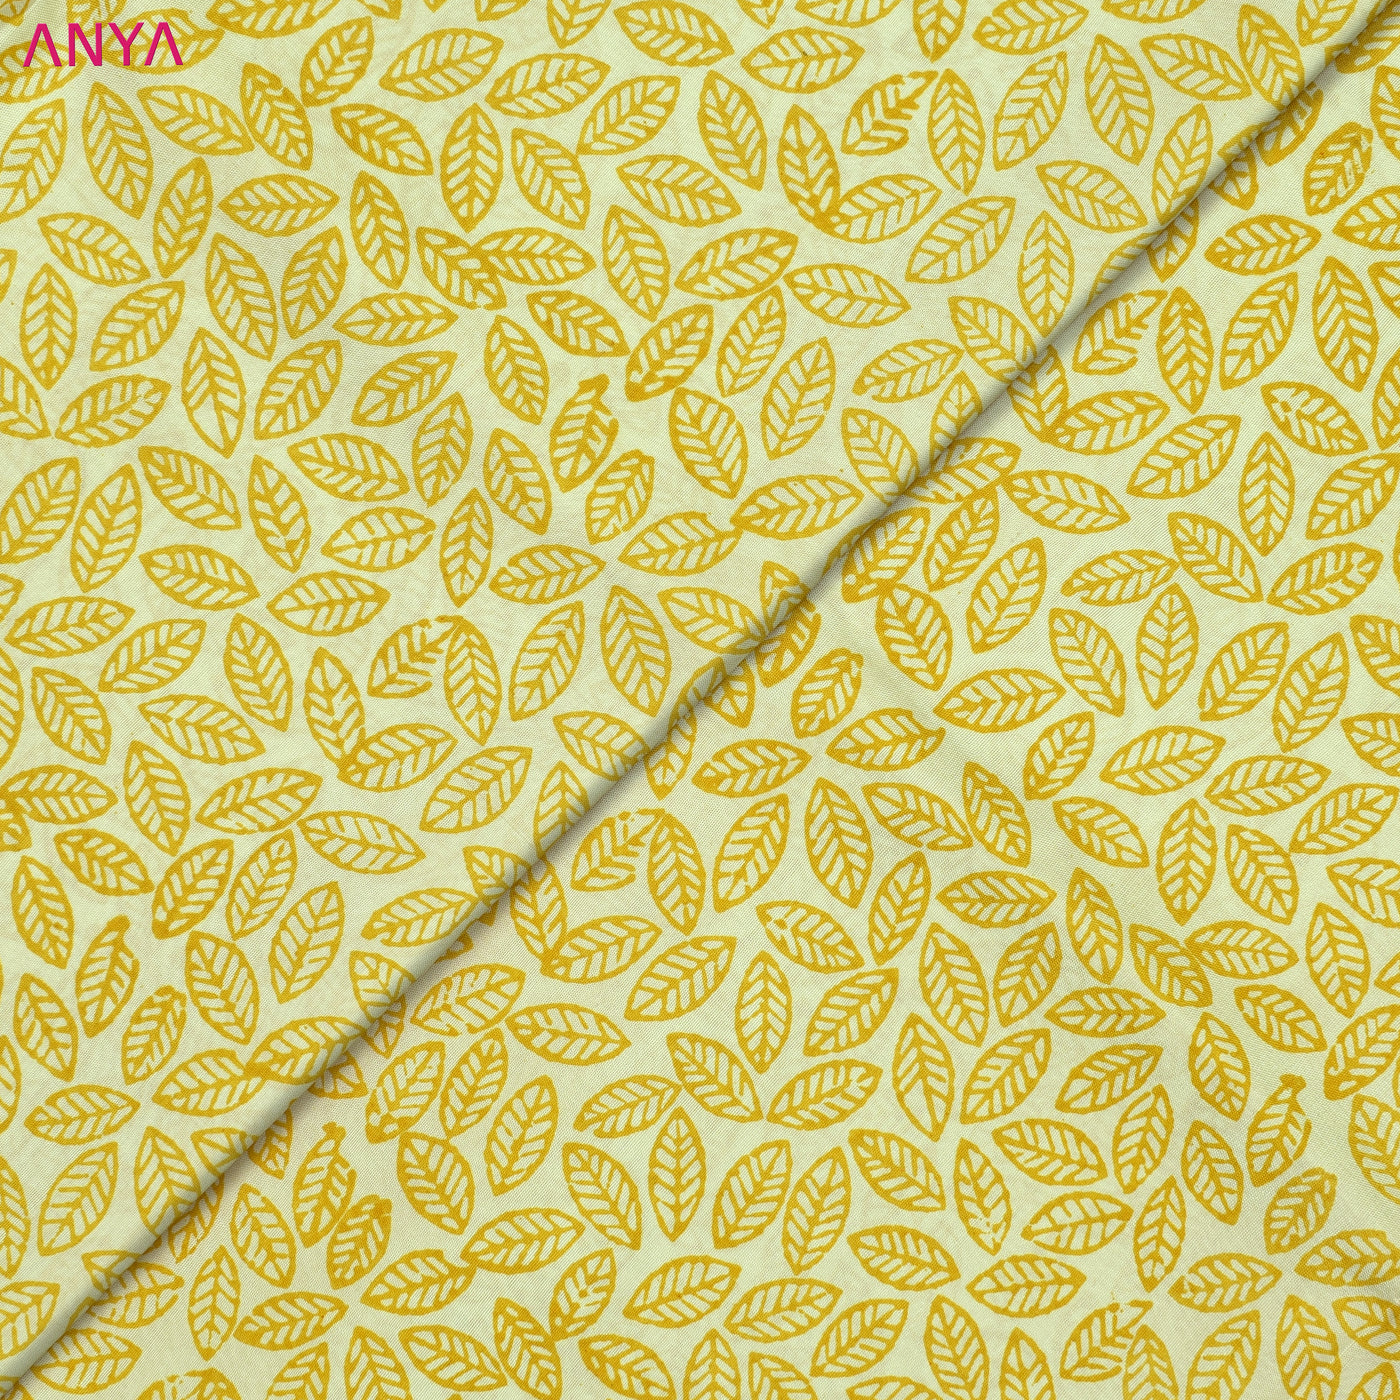 Off White Kanchi Silk Printed Fabric with Mustard Leaf Printed Design